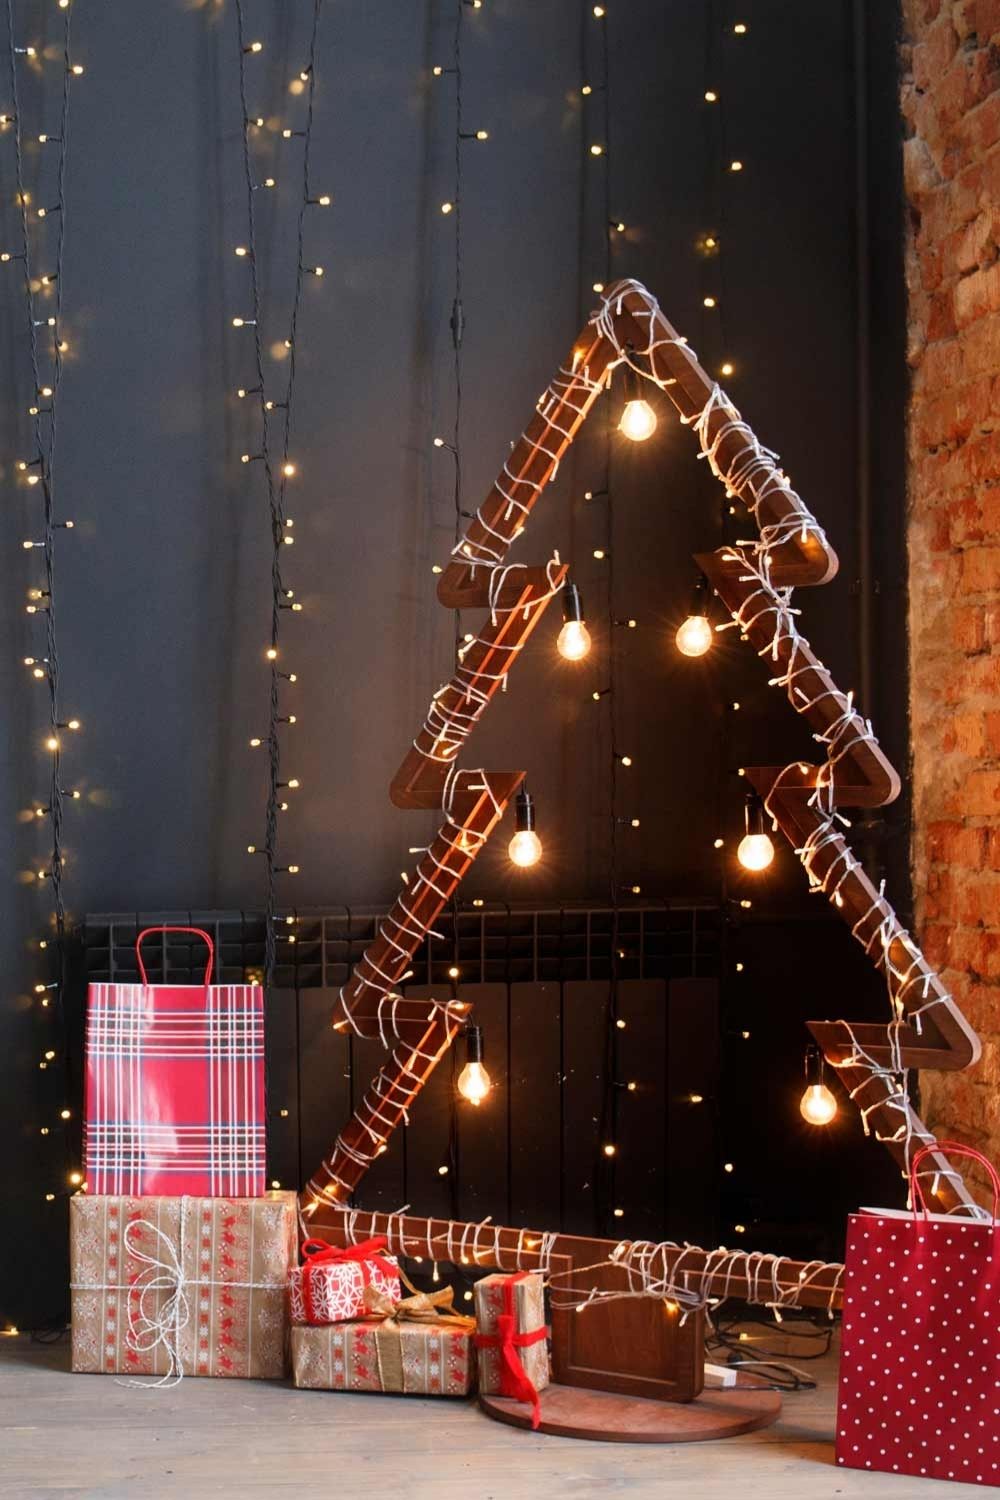 33 Great Christmas garlands ideas for 2021 to decorate your House